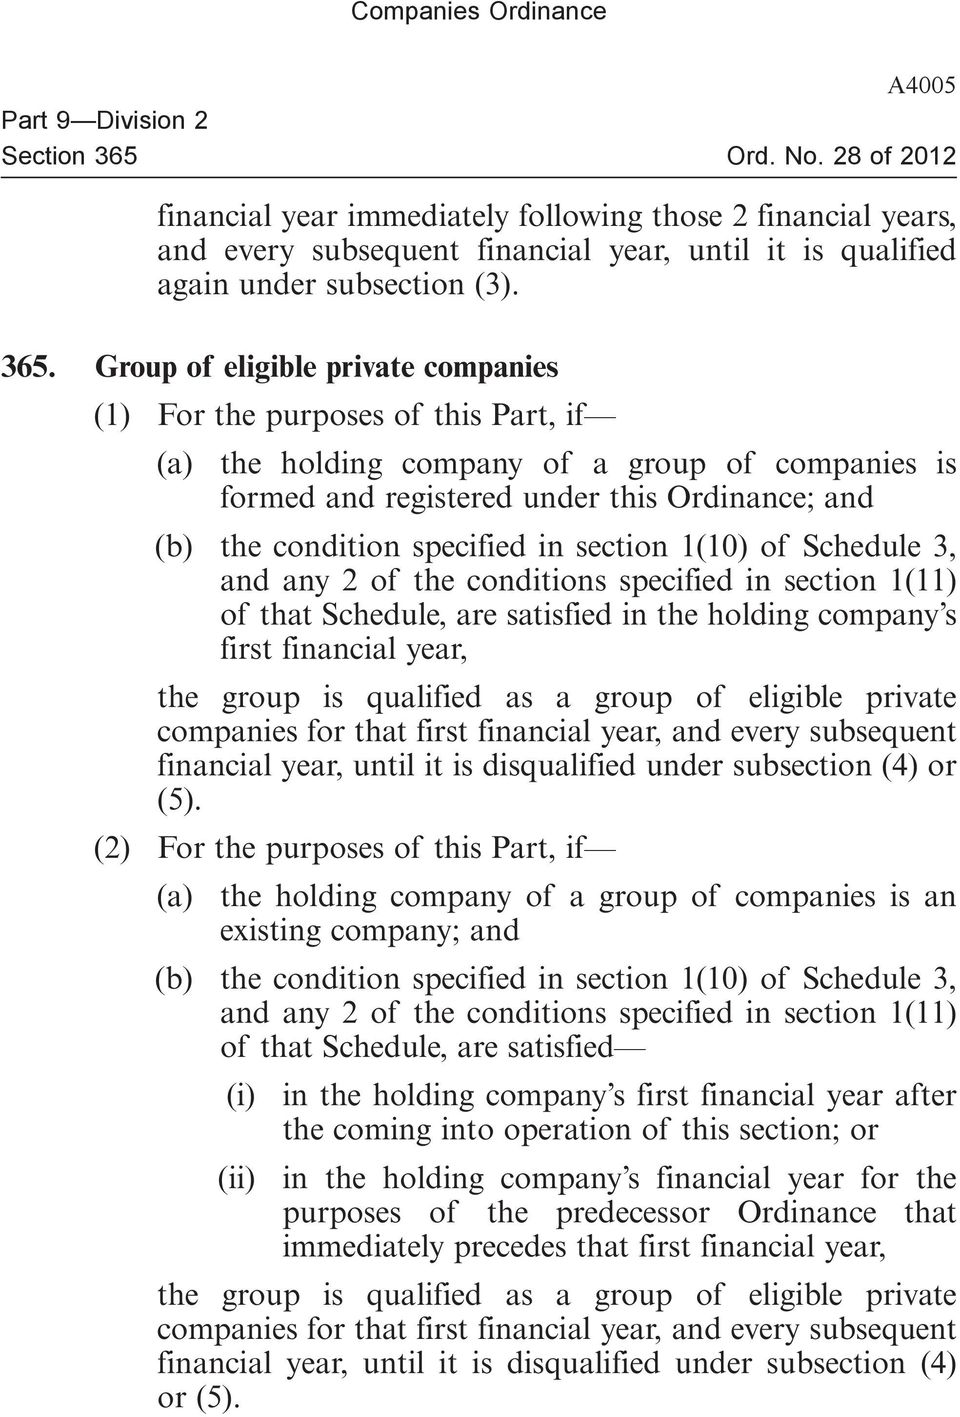 Group of eligible private companies (1) For the purposes of this Part, if (a) the holding company of a group of companies is formed and registered under this Ordinance; and (b) the condition